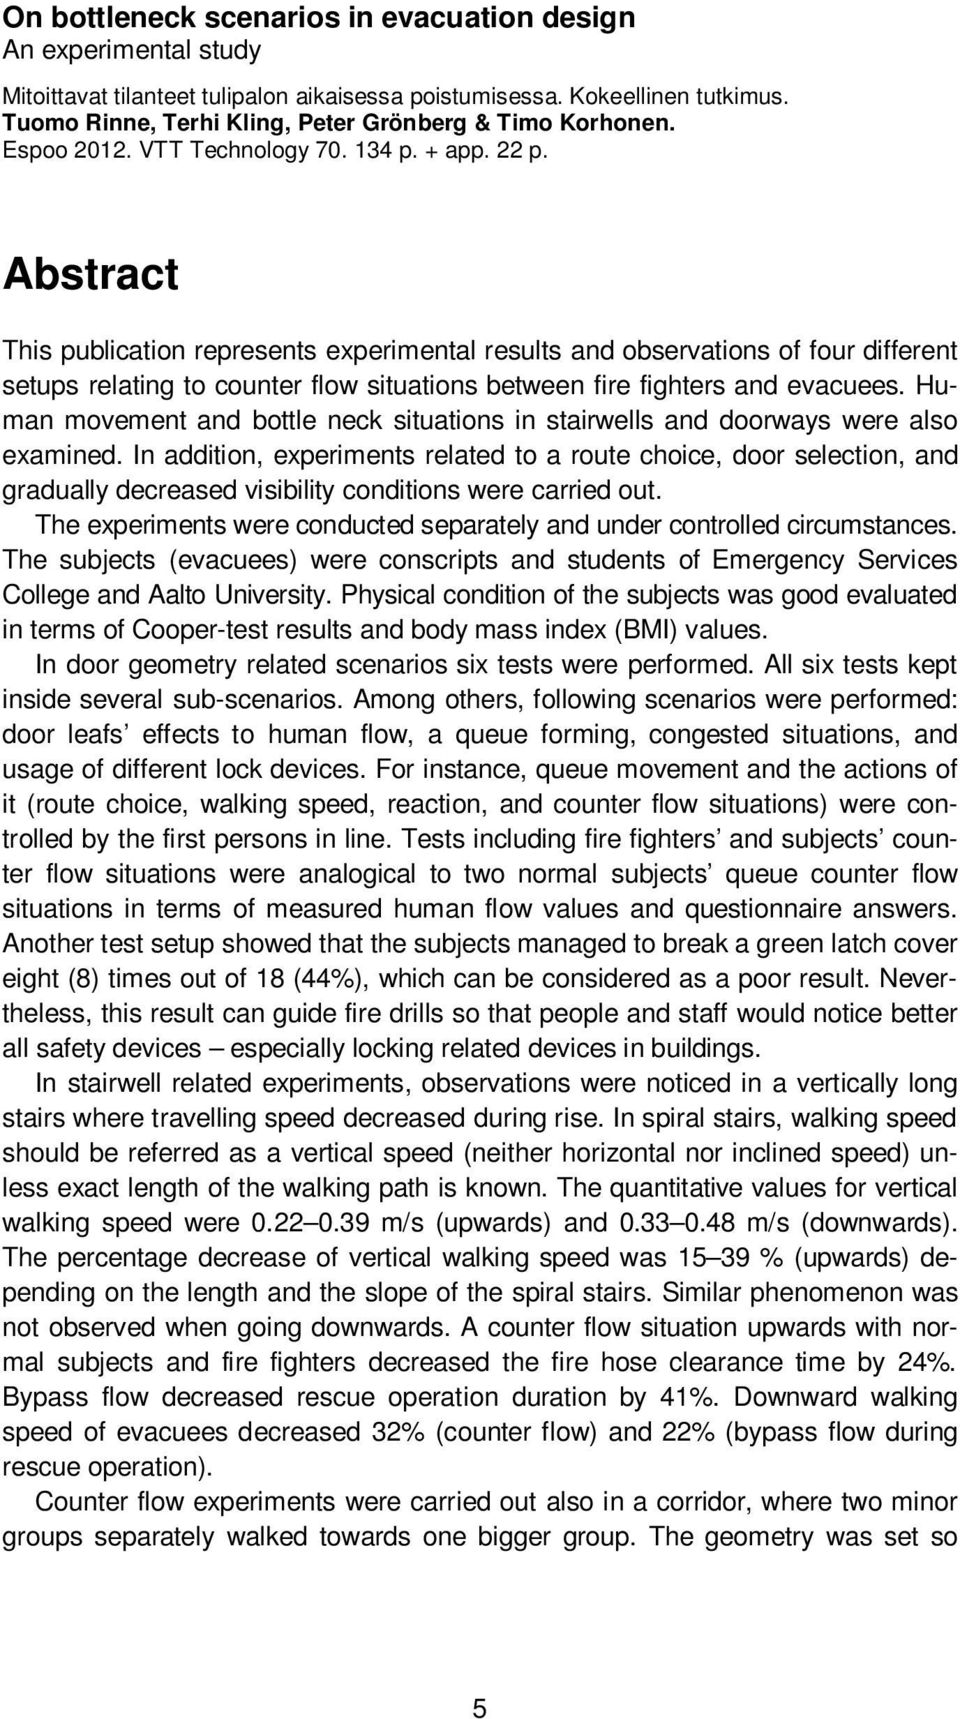 Abstract This publication represents experimental results and observations of four different setups relating to counter flow situations between fire fighters and evacuees.